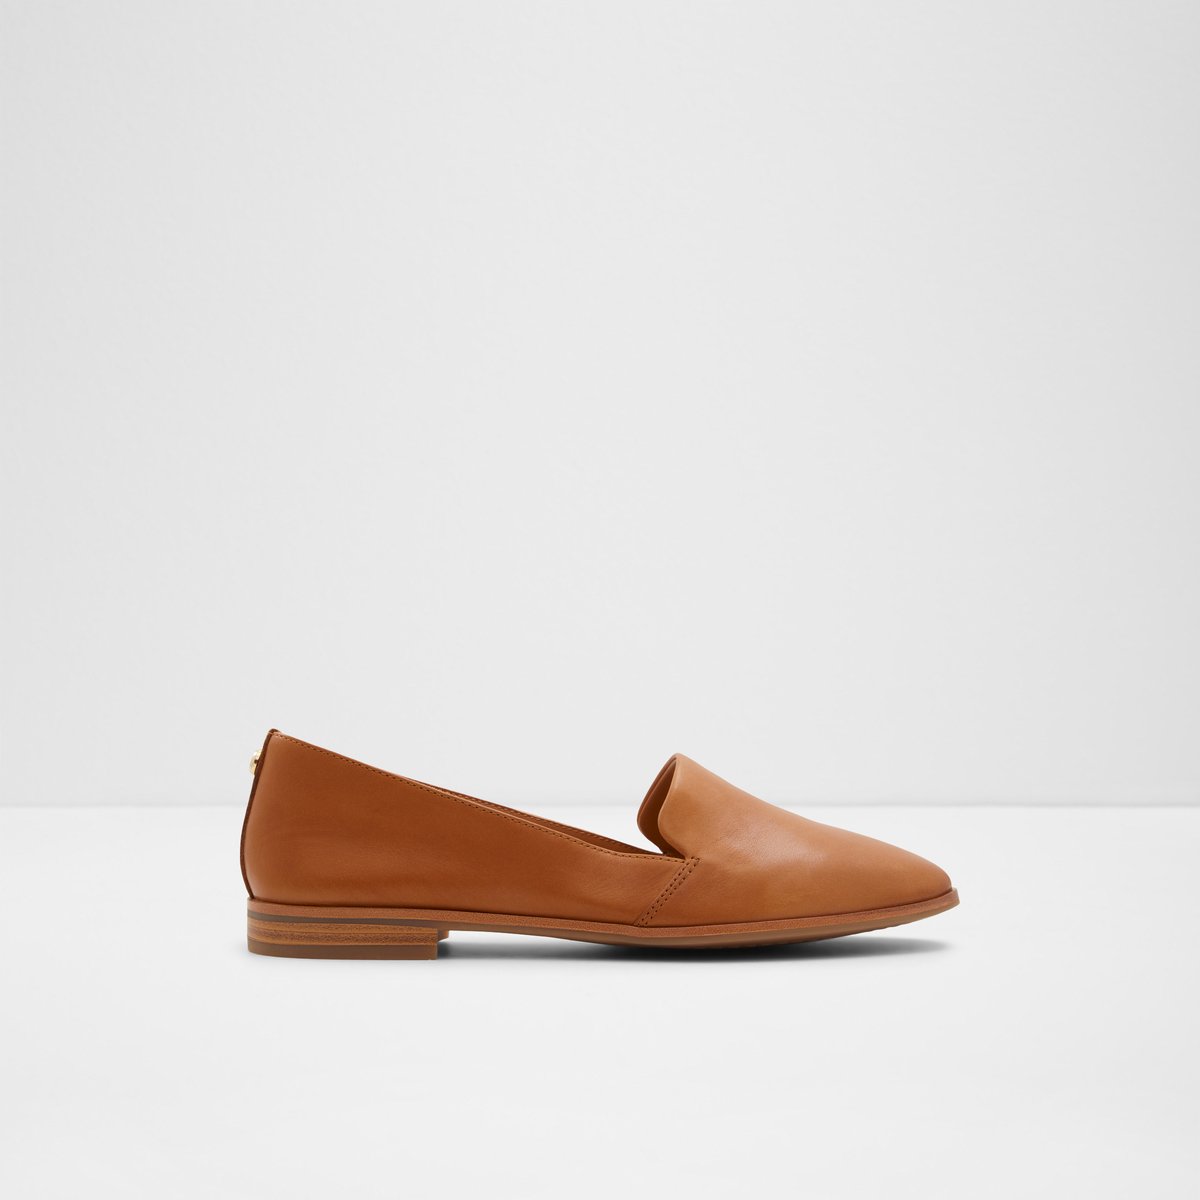 Veadith2.0 Loafers